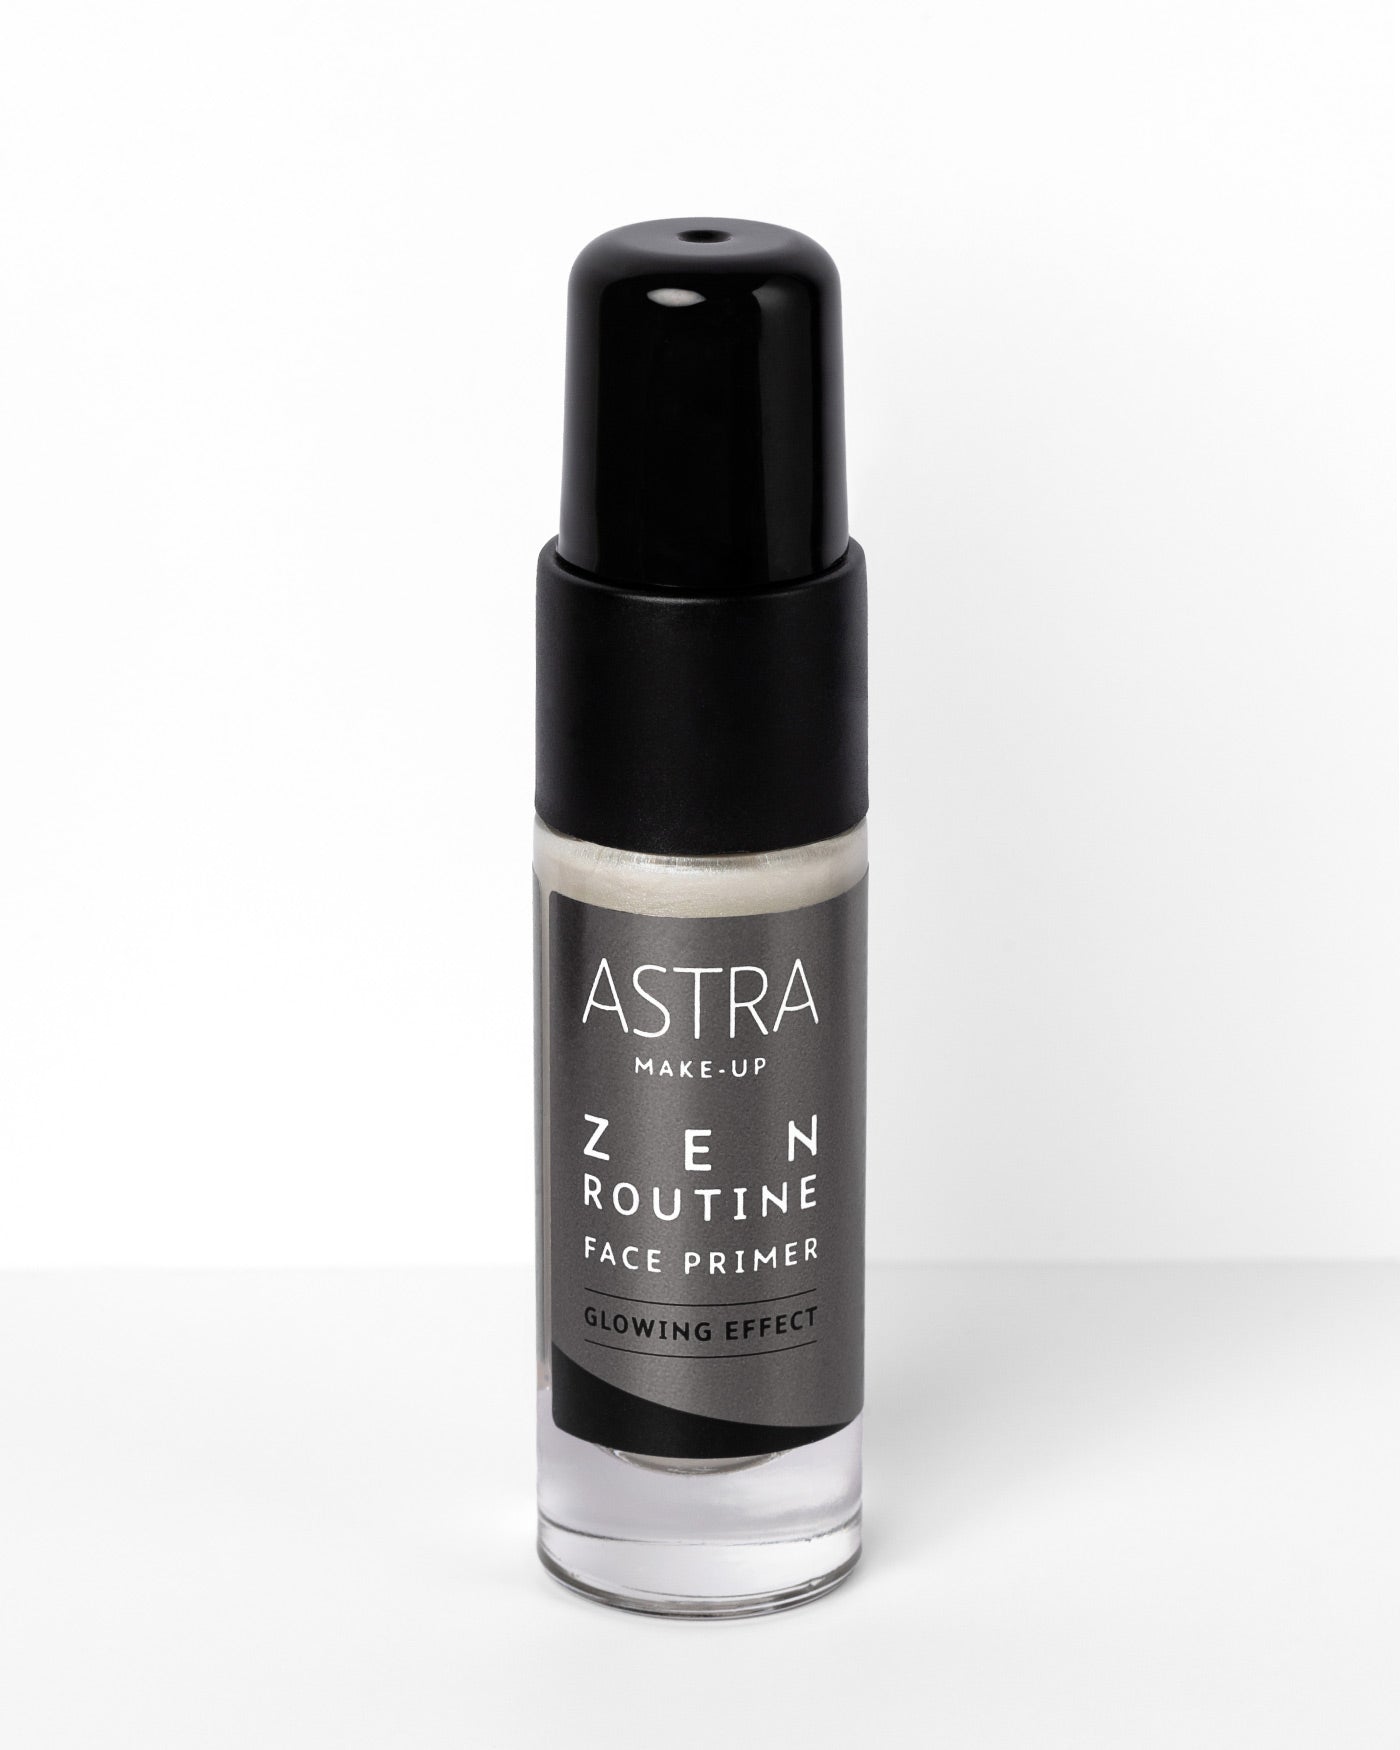 ZEN ROUTINE FACE PRIMER GLOWING EFFECT - Make-Up - Astra Make-Up